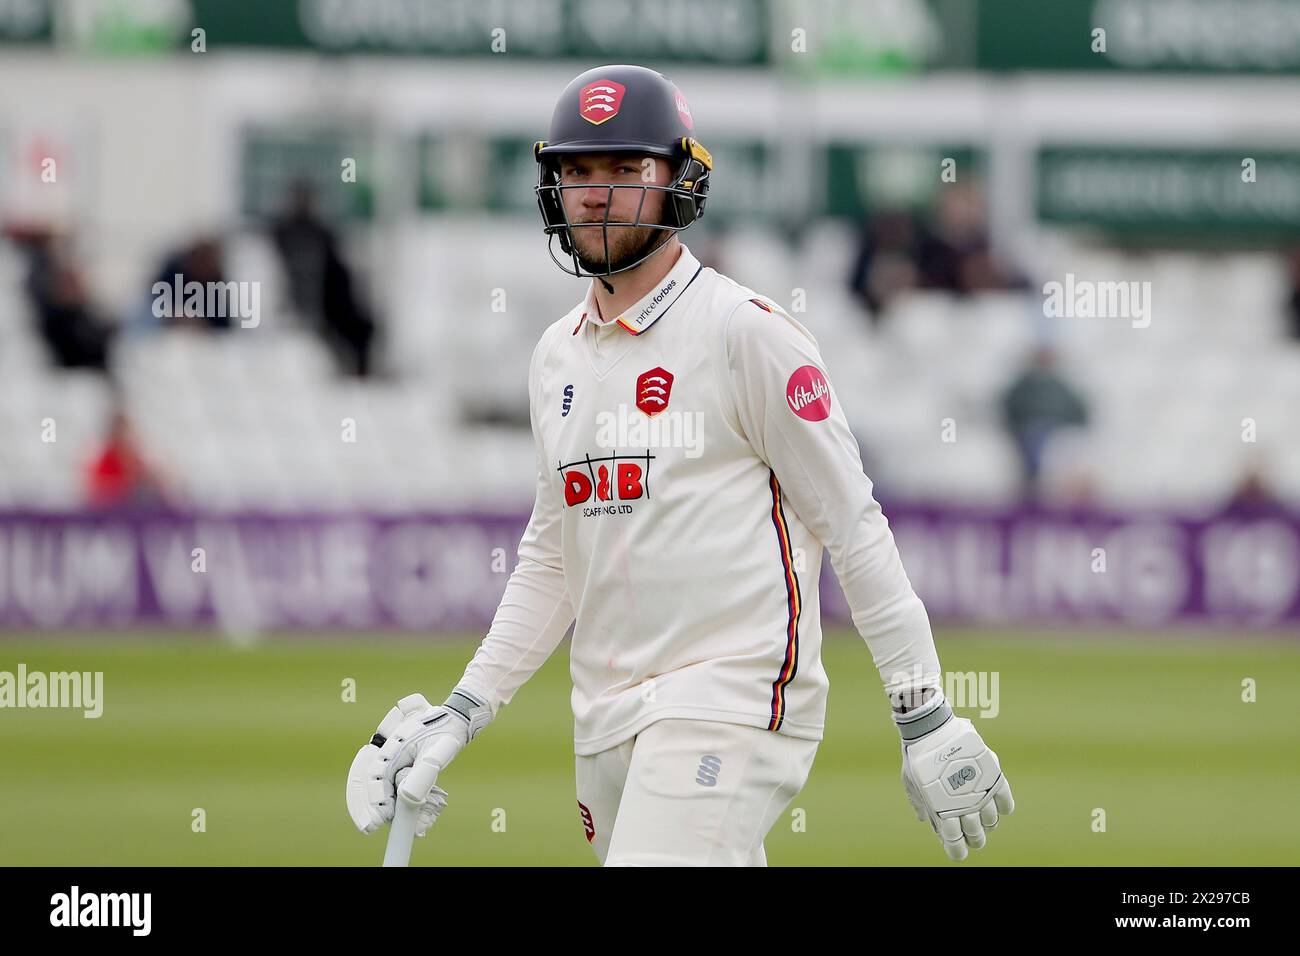 Sam Cook of Essex leaves the field having been dismissed for 49 during Essex CCC vs Lancashire CCC, Vitality County Championship Division 1 Cricket at Stock Photo